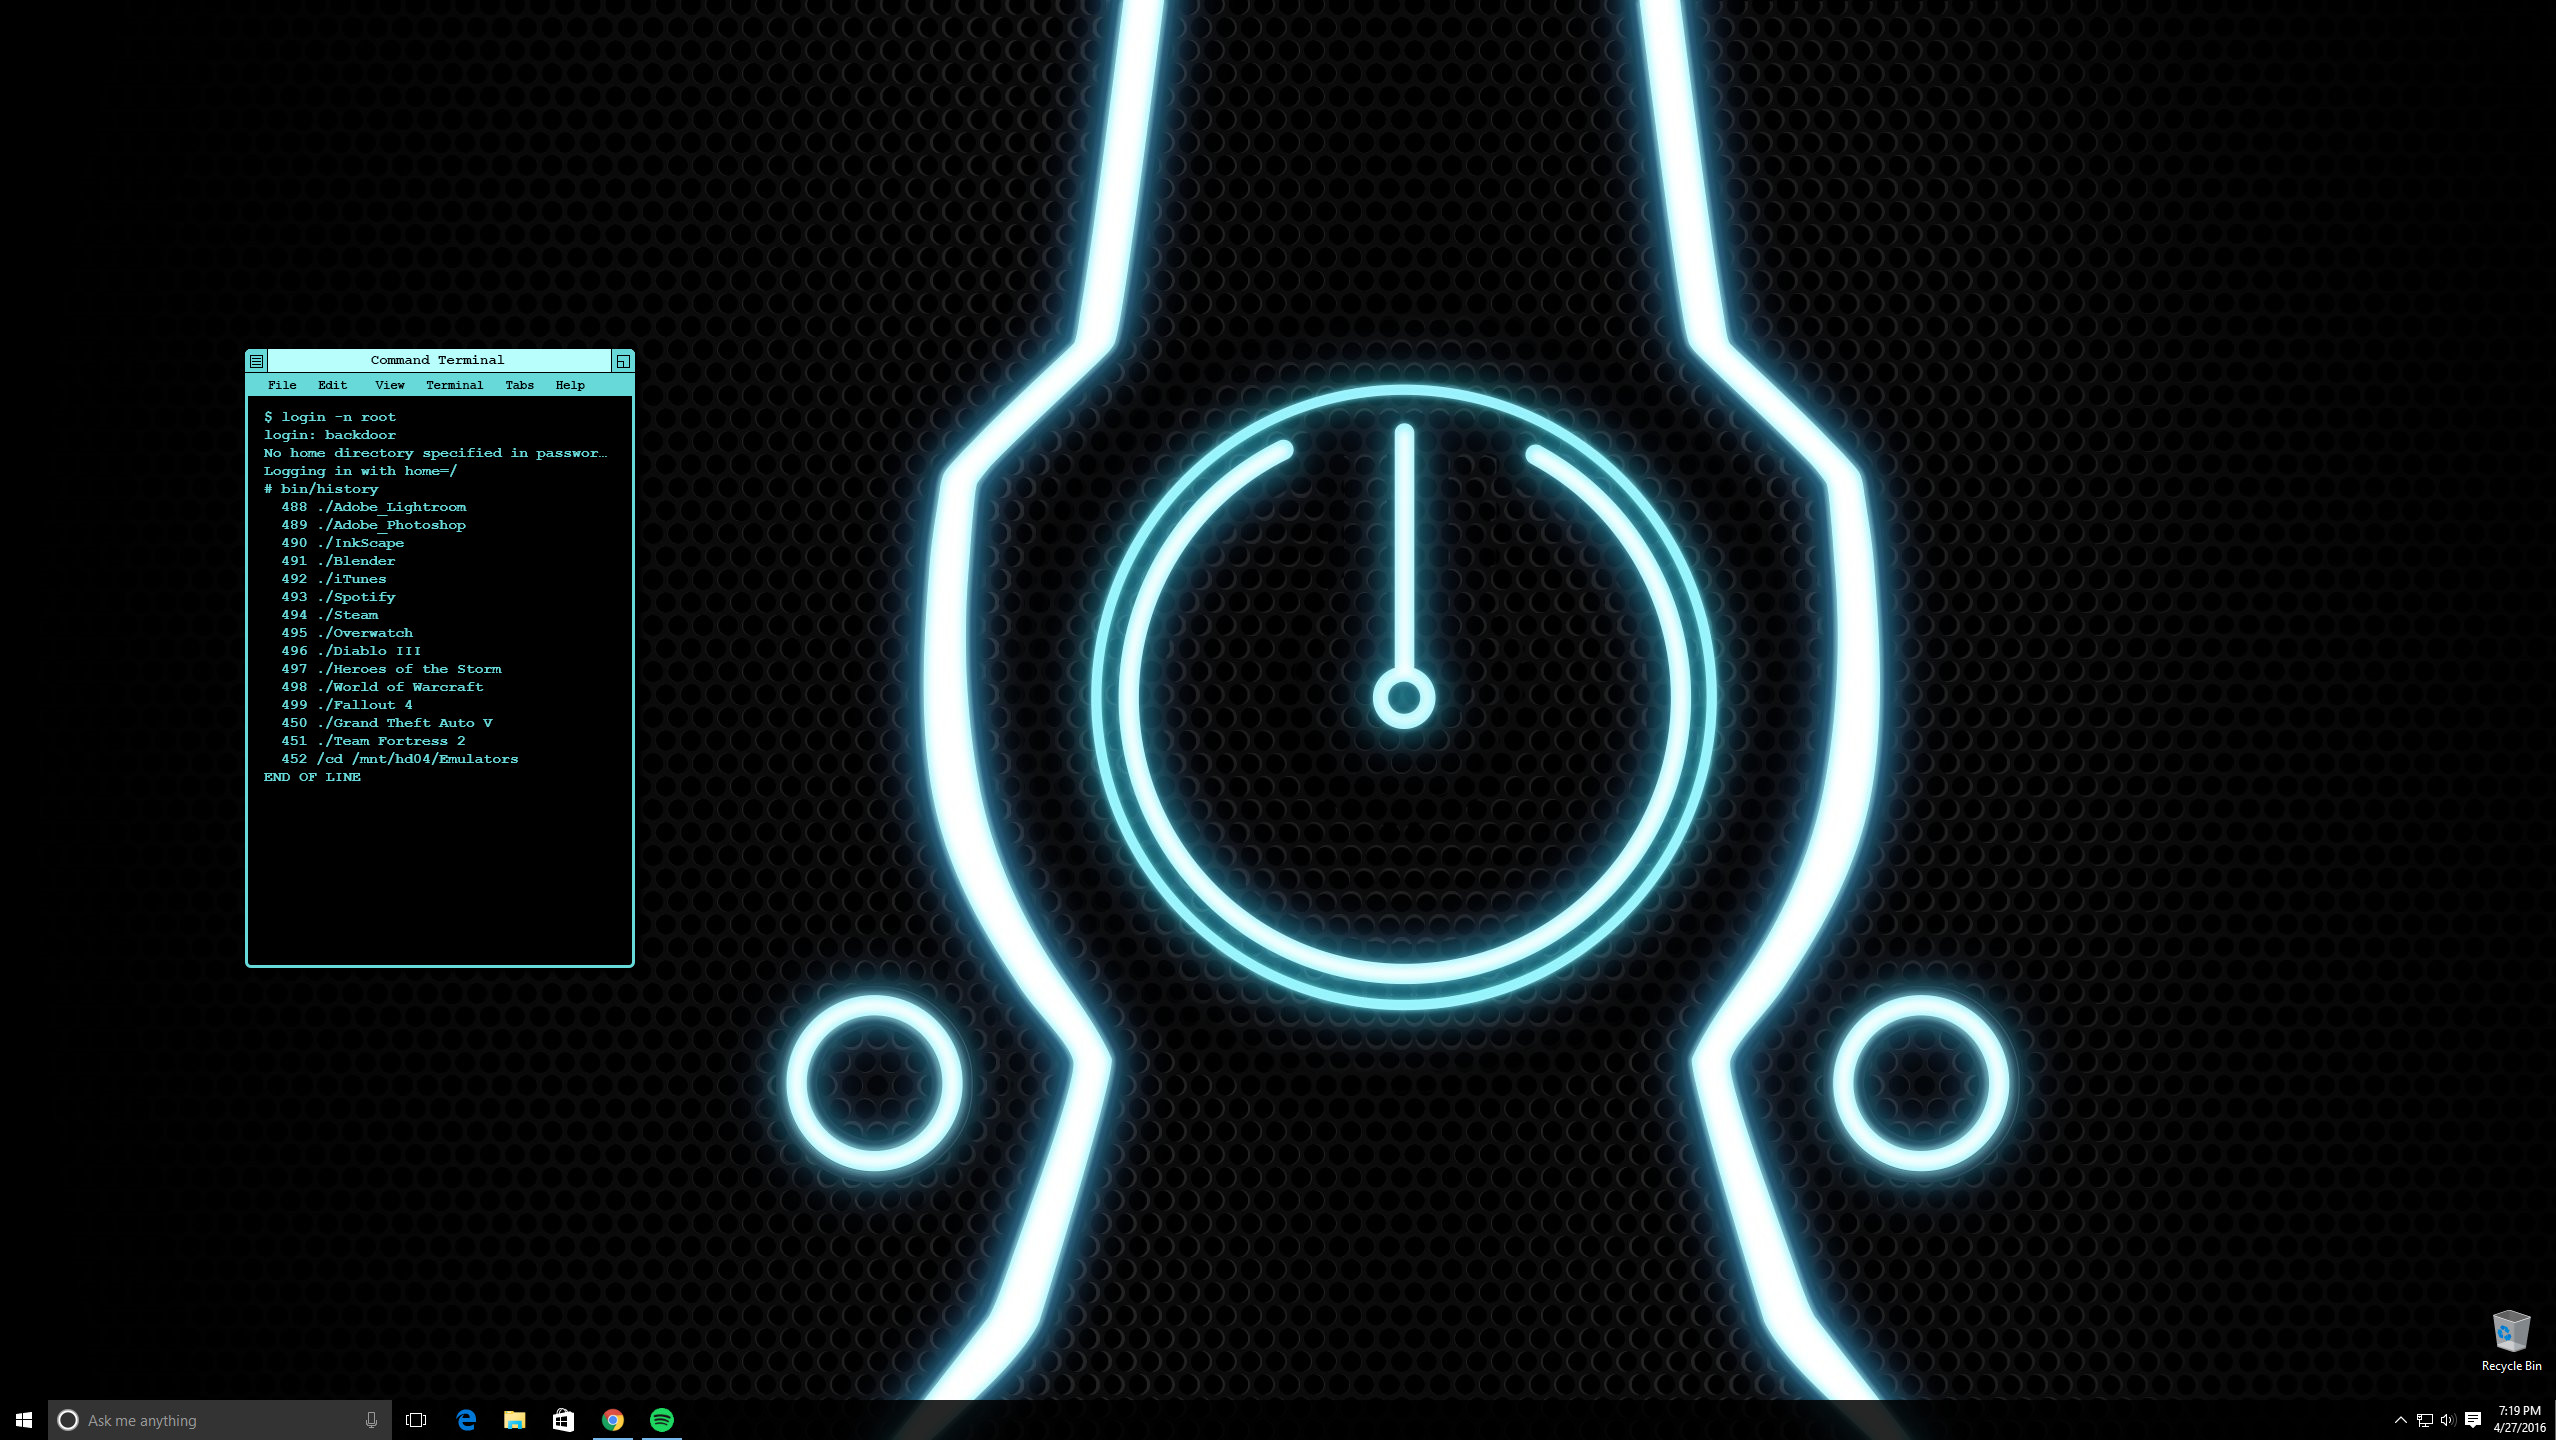 2556x1440 Tron Legacy Launcher and Background by Insanemime Tron Legacy Launcher and  Background by Insanemime